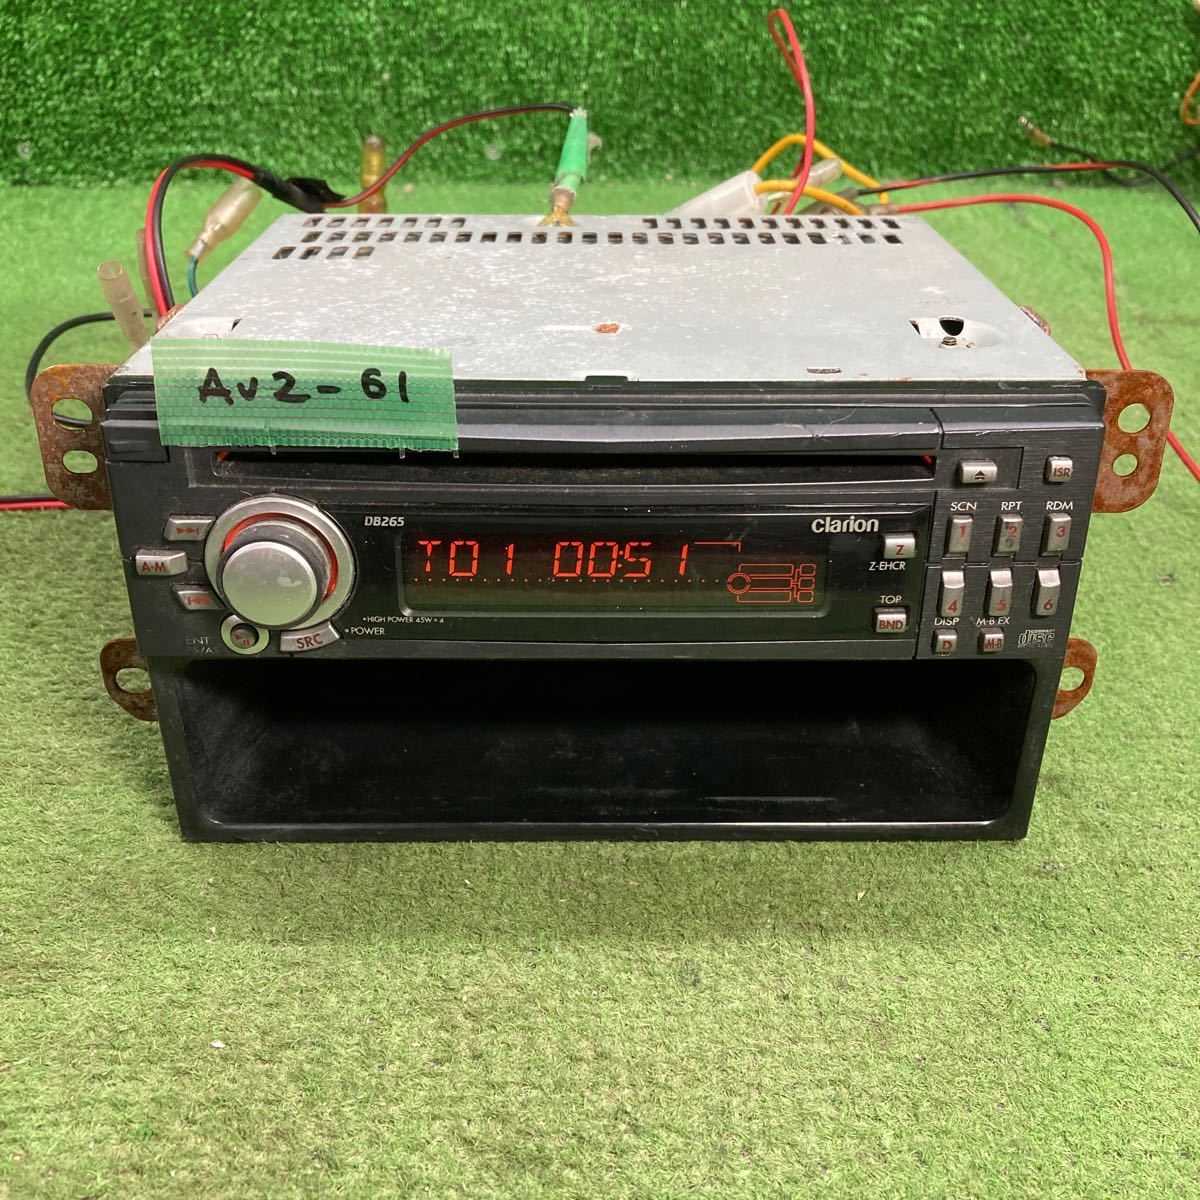 AV2-61 super-discount car stereo clarion DB265 0206159 CD box attaching body only simple operation verification ending used present condition goods 